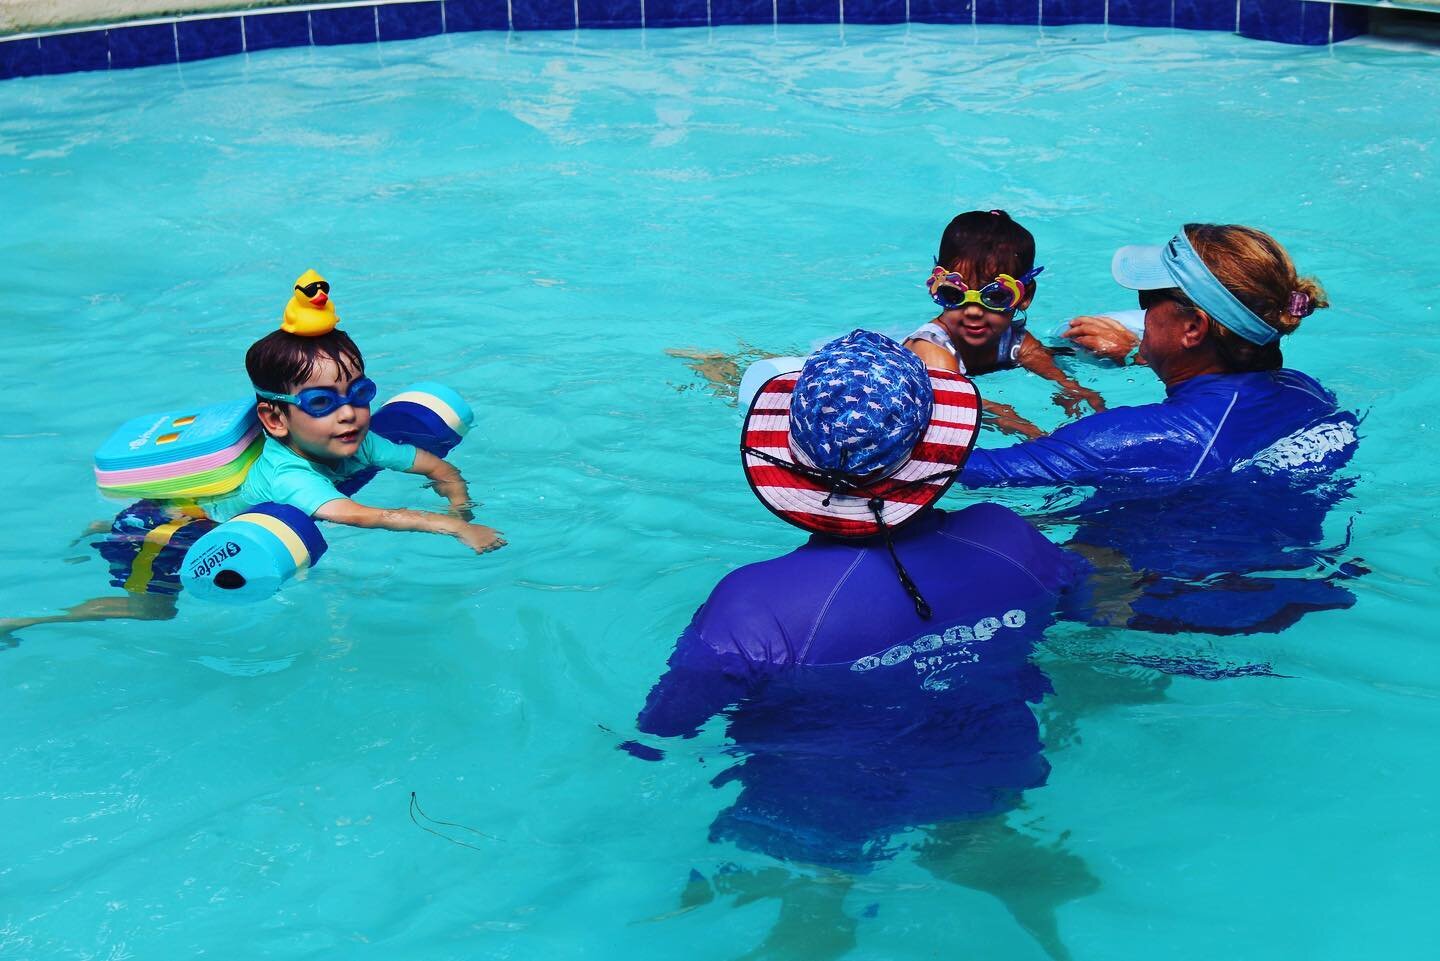 August is hot, what better way to cool off than through swimming? #martarswimschool